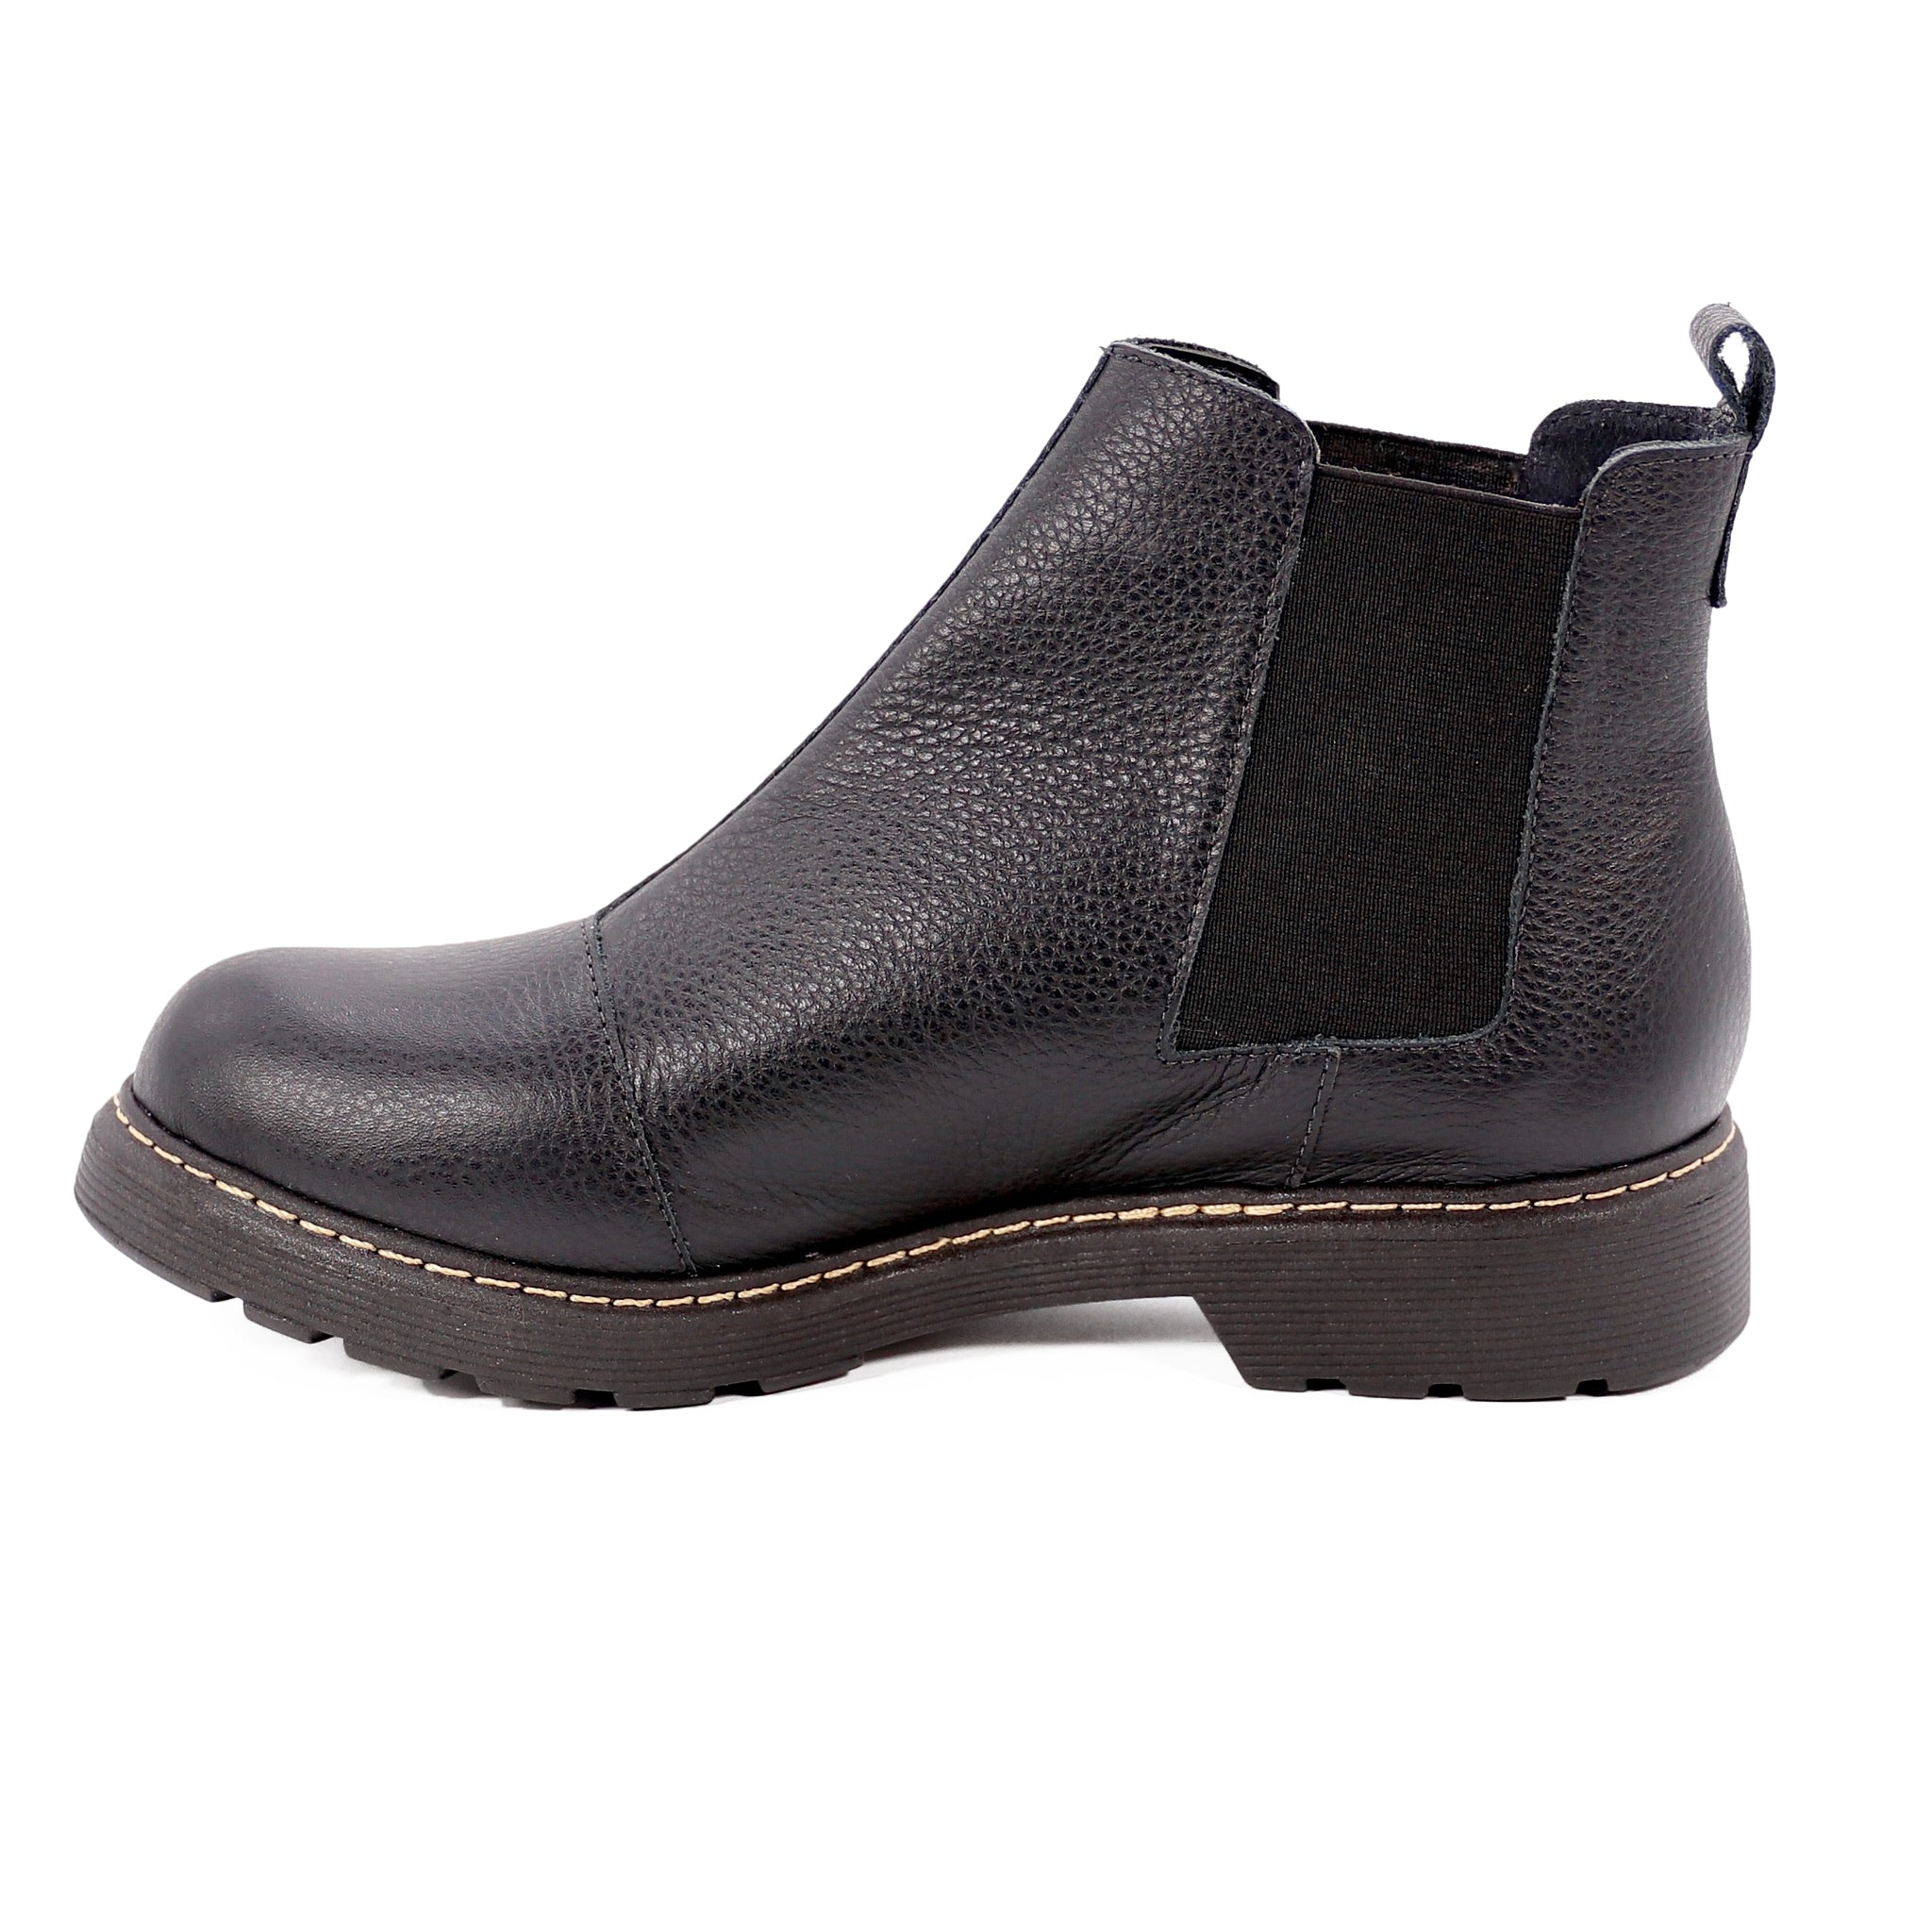 women's comfort boots leather